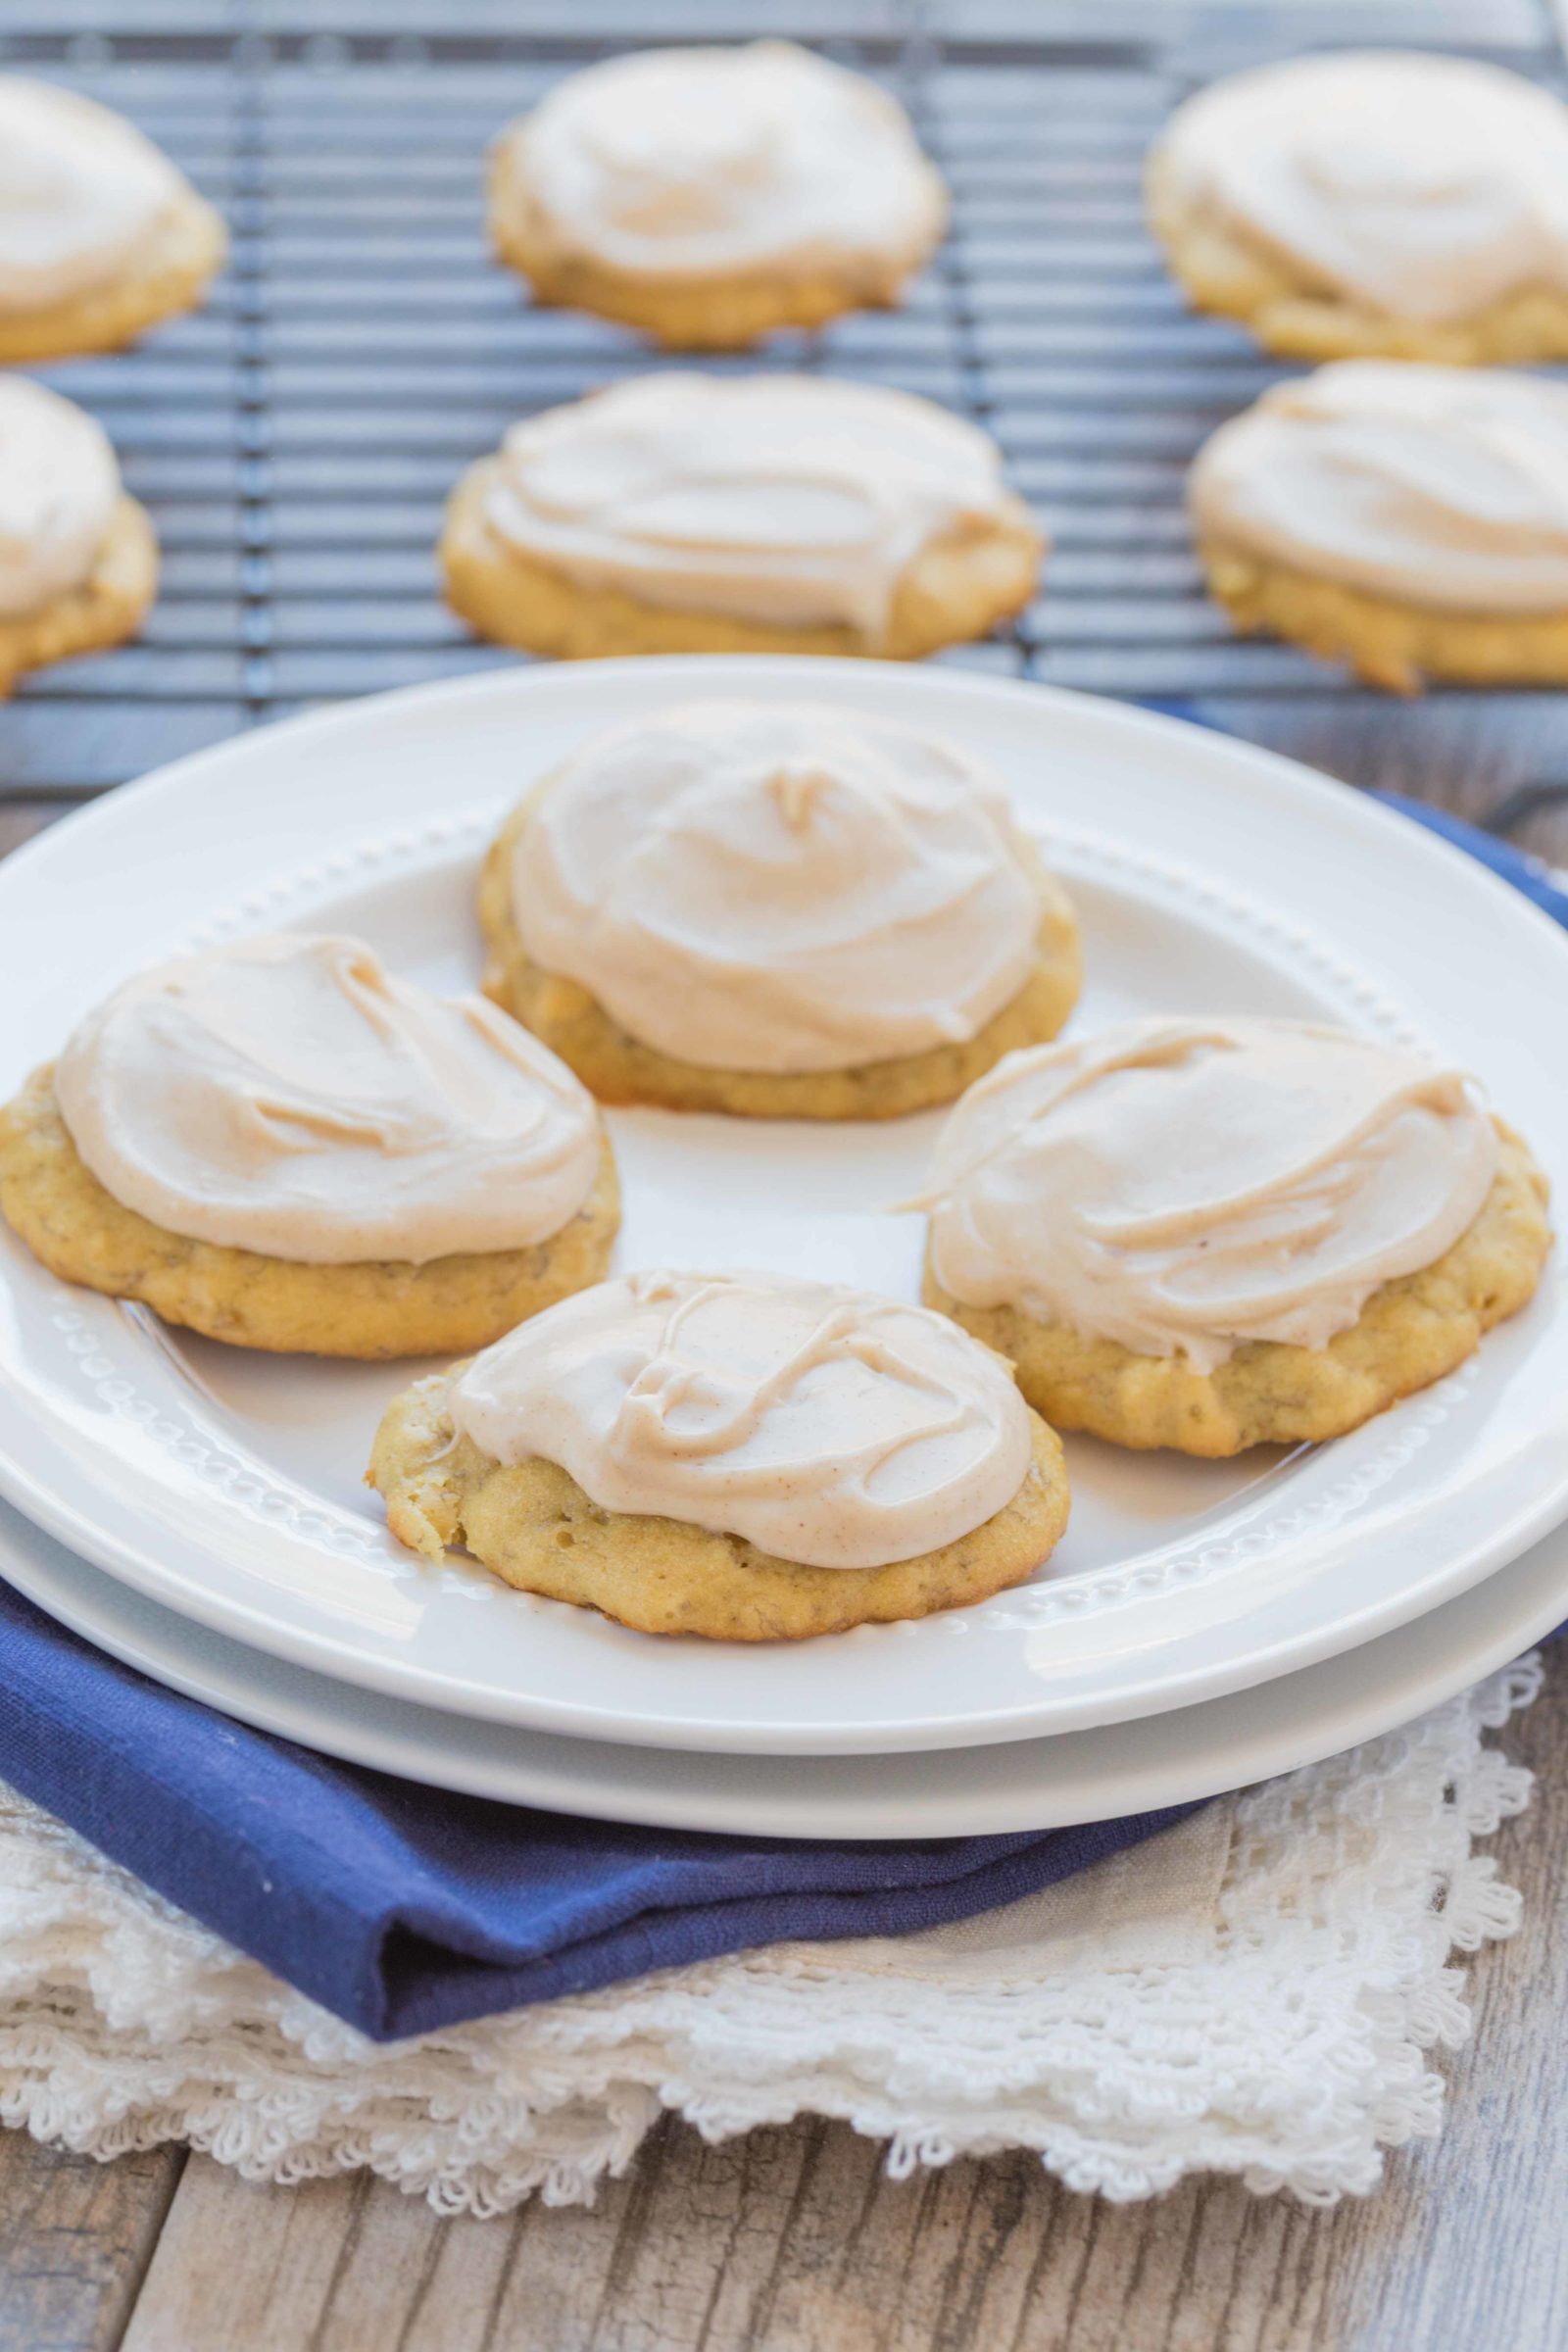 Banana Cookies with Browned Butter Frosting ~ mykitchencraze.com ~ Use up those browned bananas with this easy and delicious Banana Cookie recipe. Top them with a creamy and yummy Browned Butter Frosting. Everyone will love these cookies!